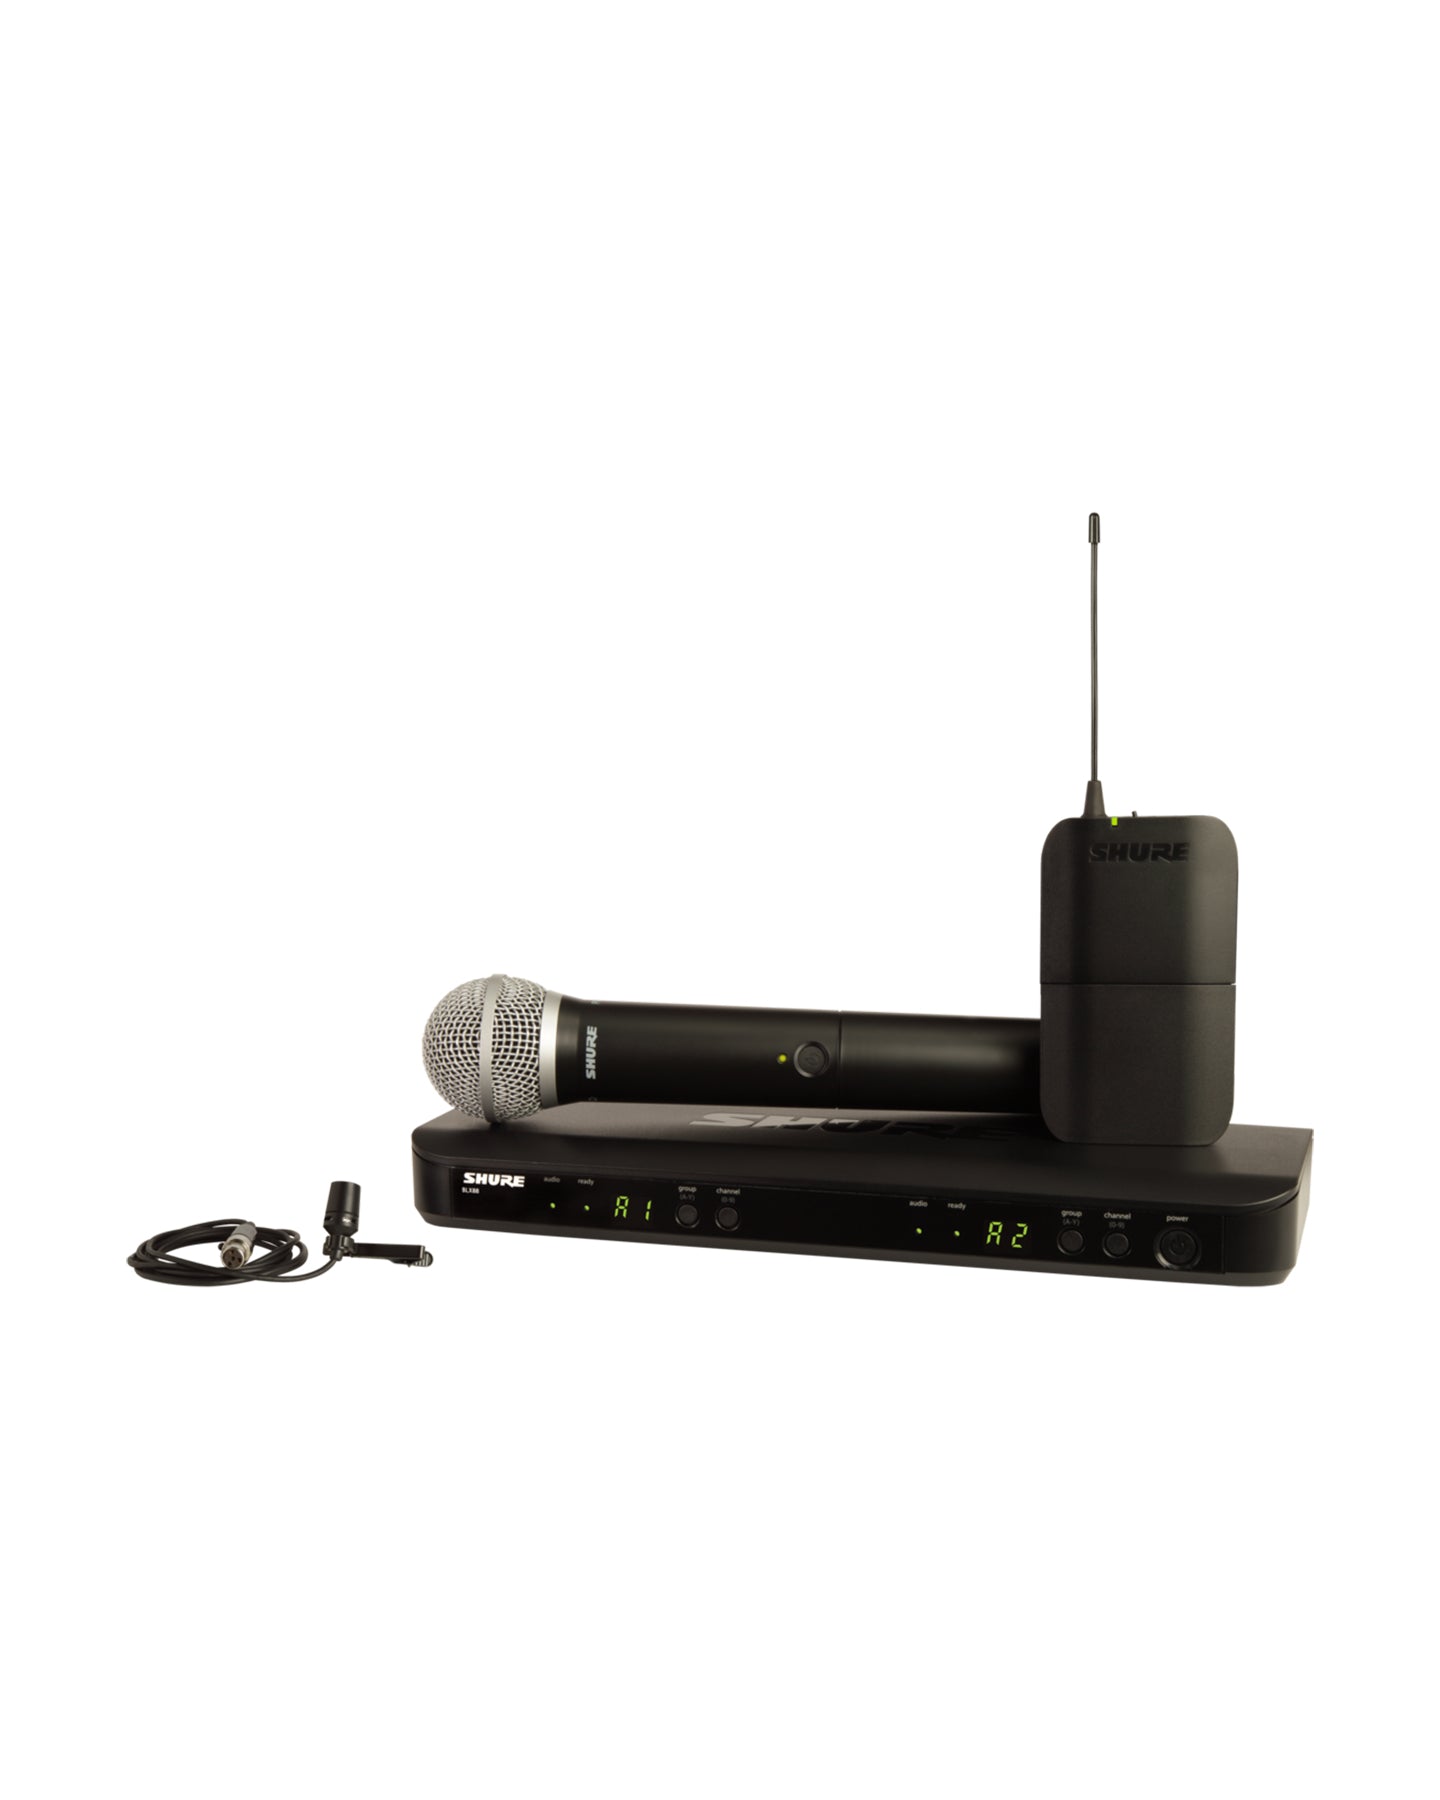 BLX1288 Combo System with CVL Lavalier Microphone & PG58 Handheld Microphone, Band H9